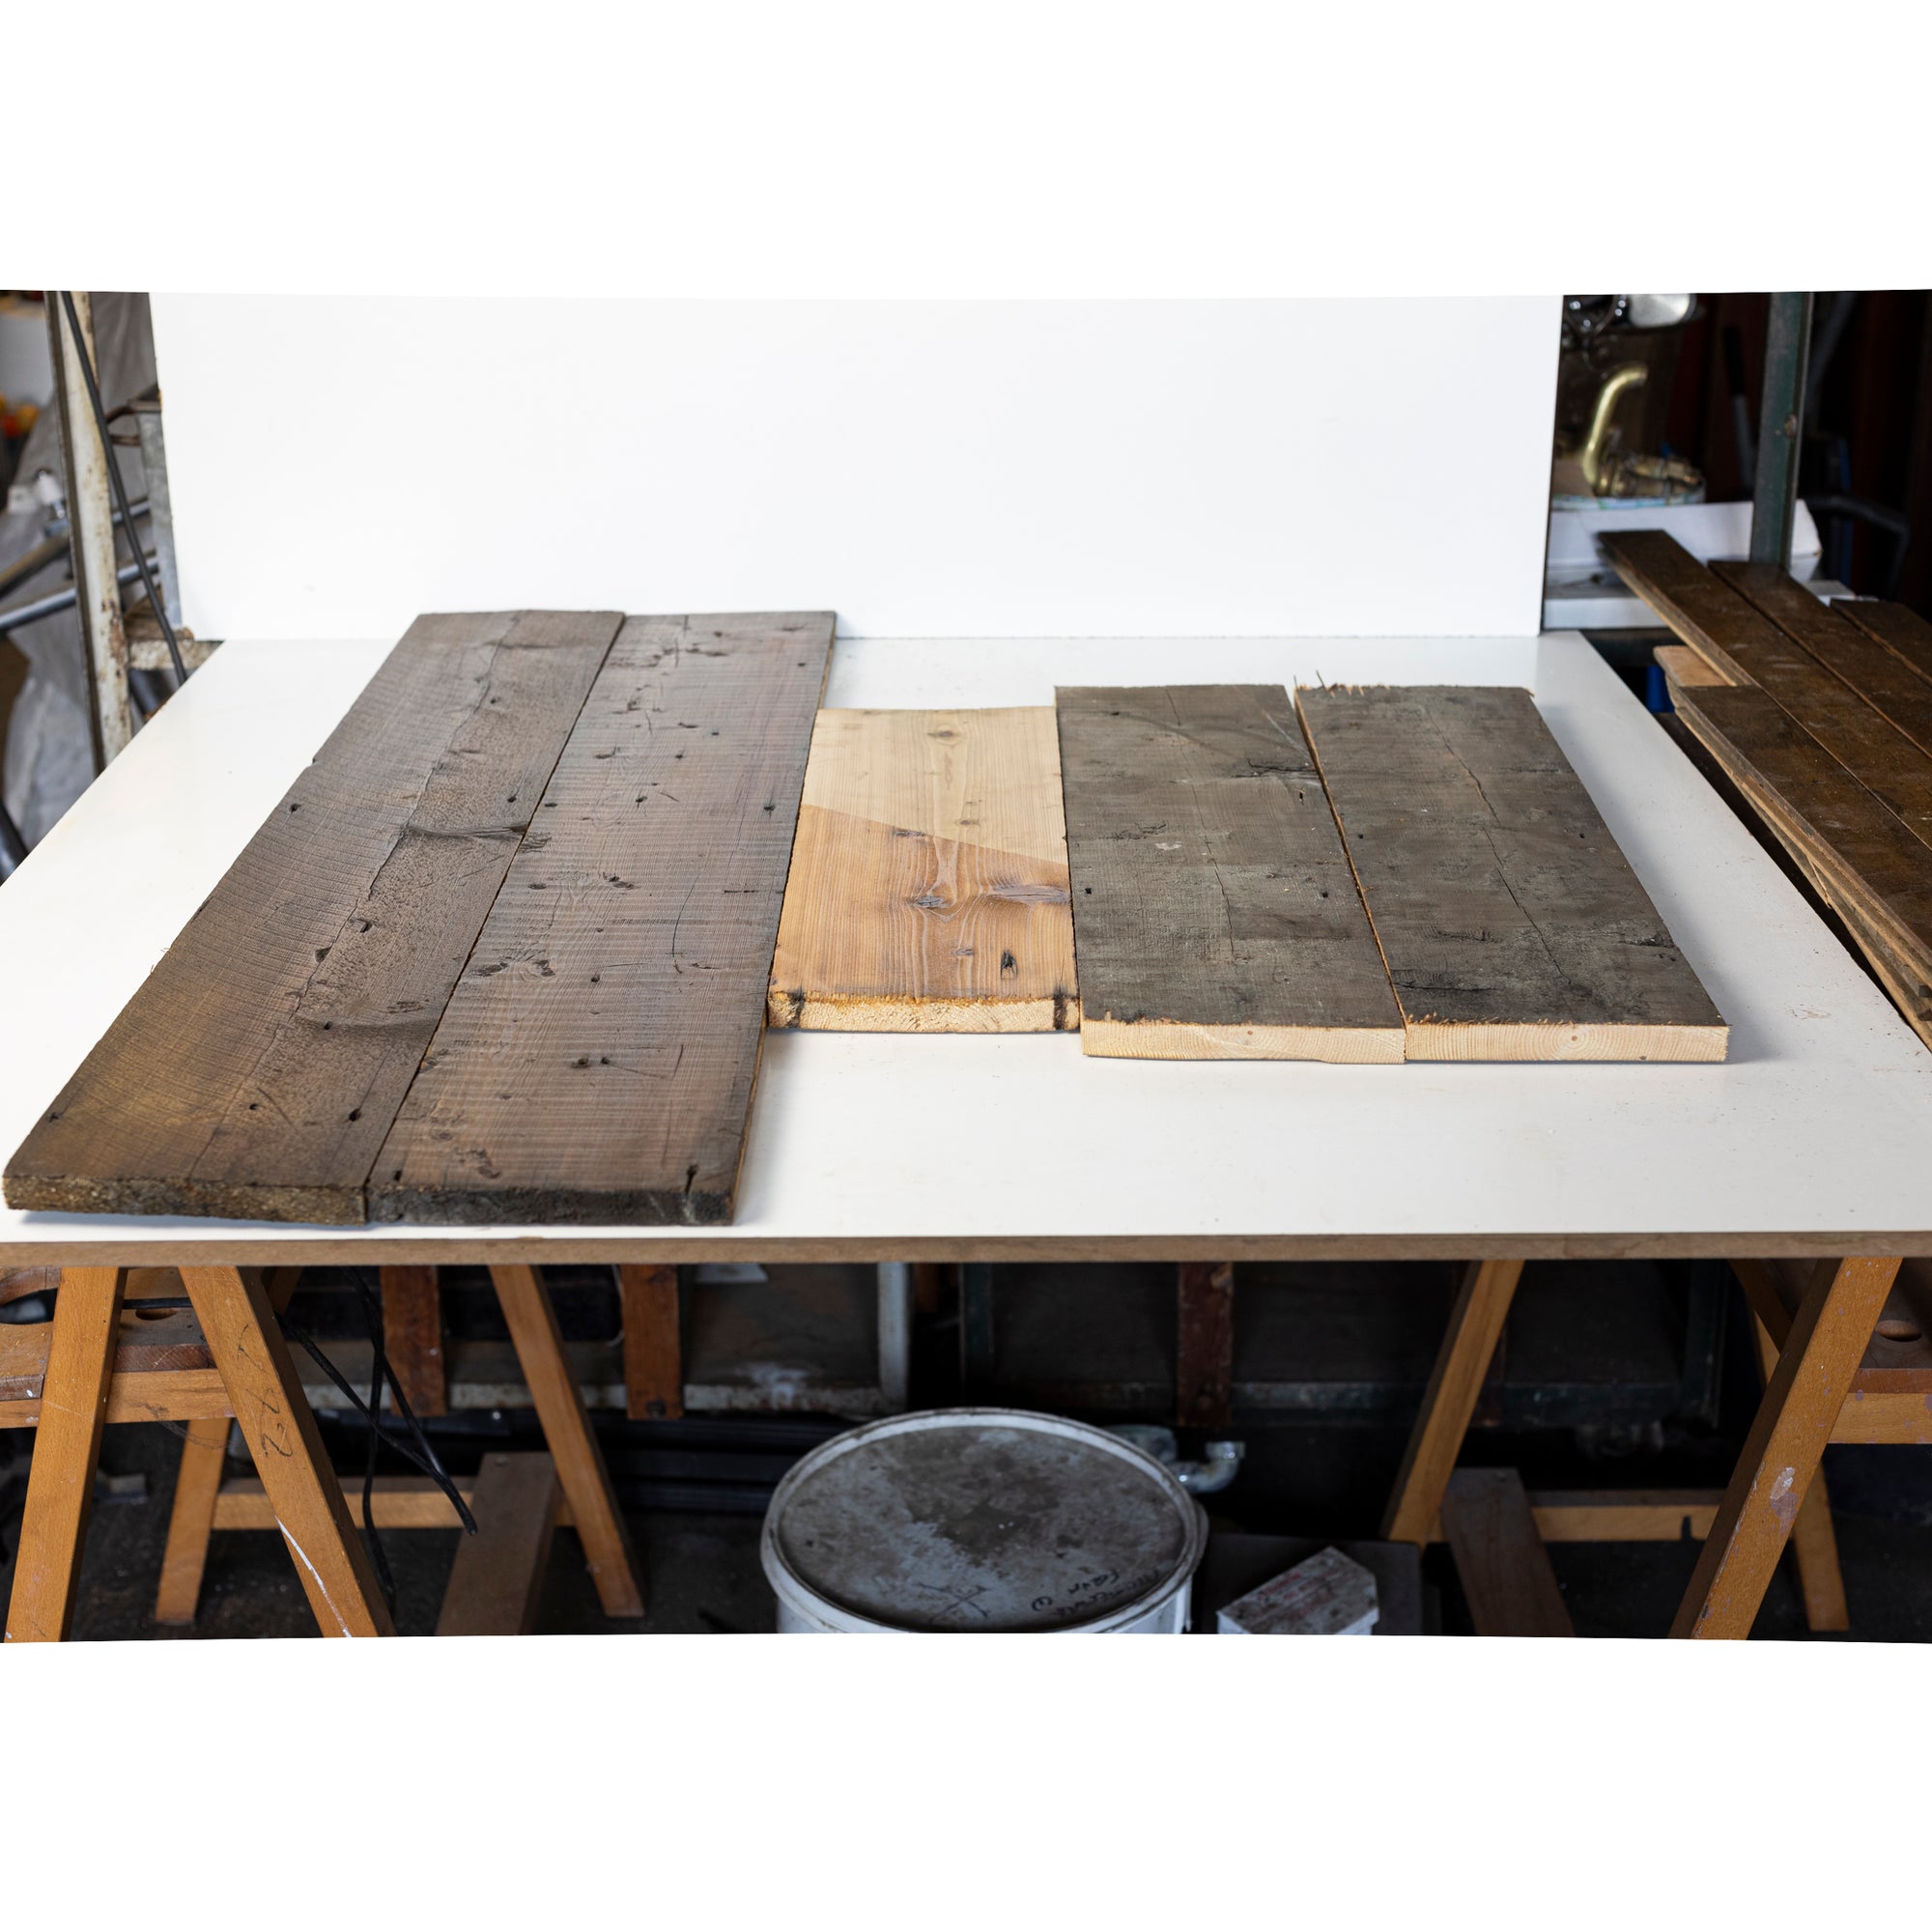 Antique Pine Wooden Flooring 1360 m2 Available | The Architectural Forum